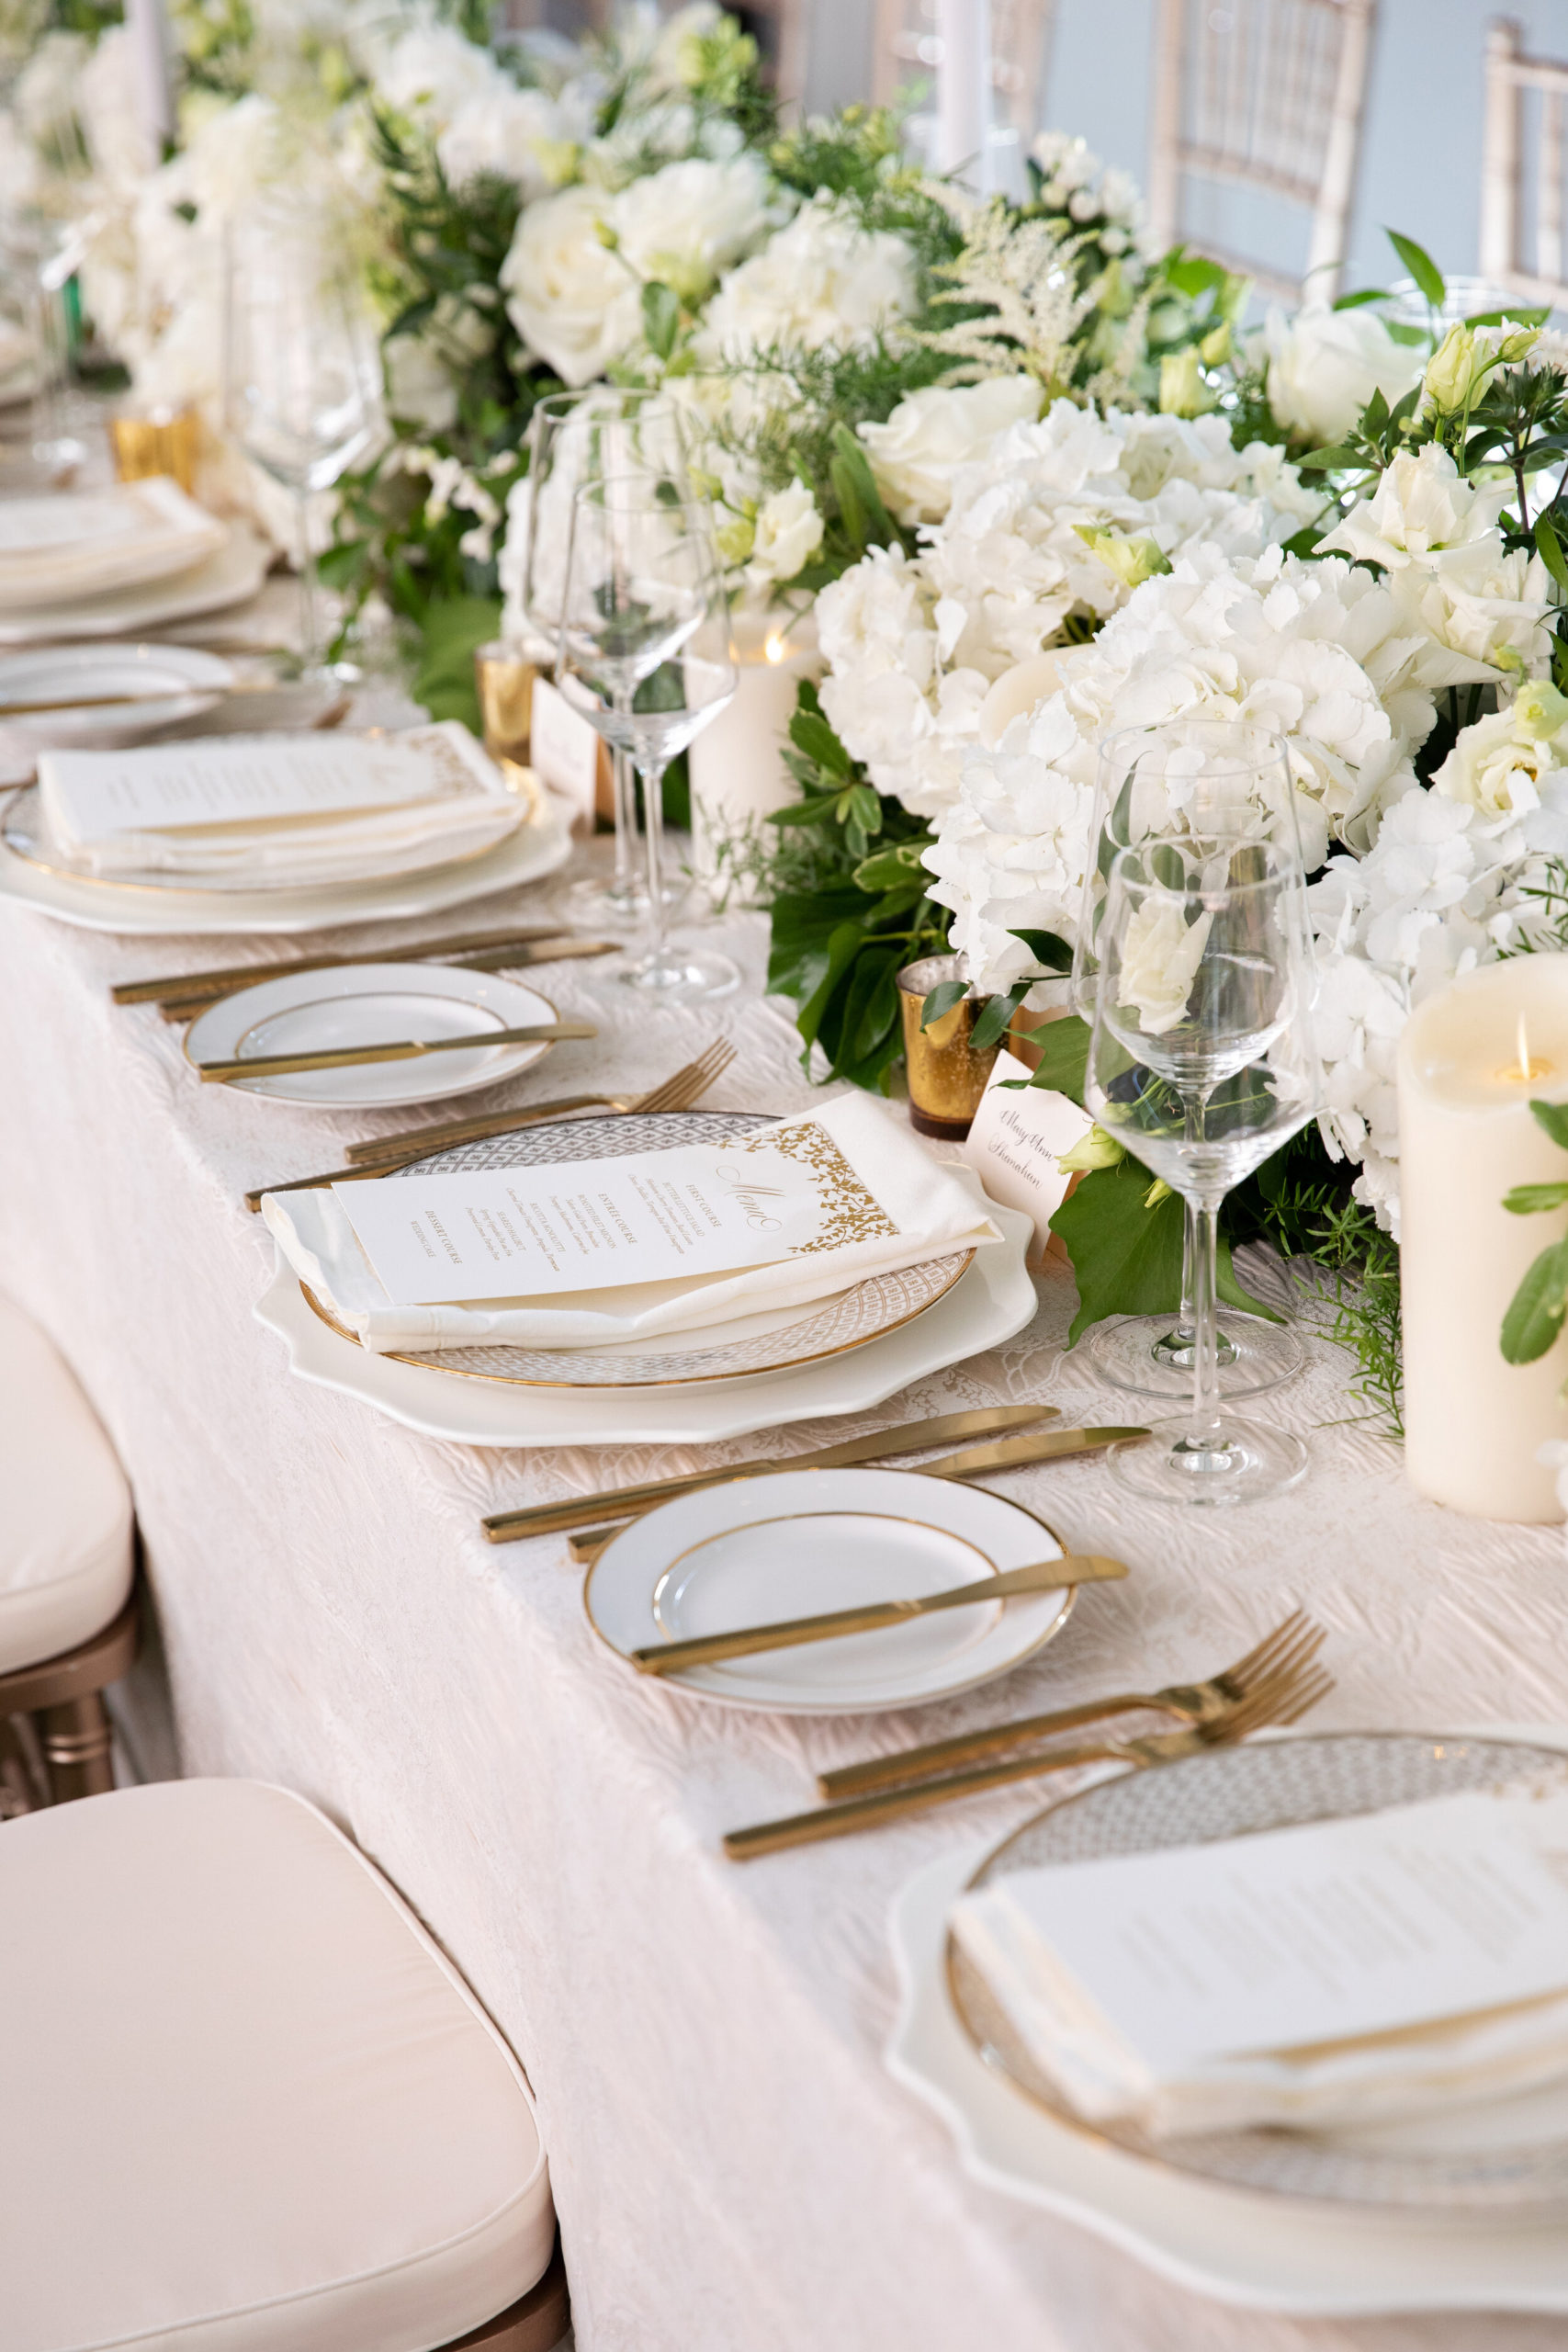 Tabletop Inspiration - Lush White Floral with Gold Accents